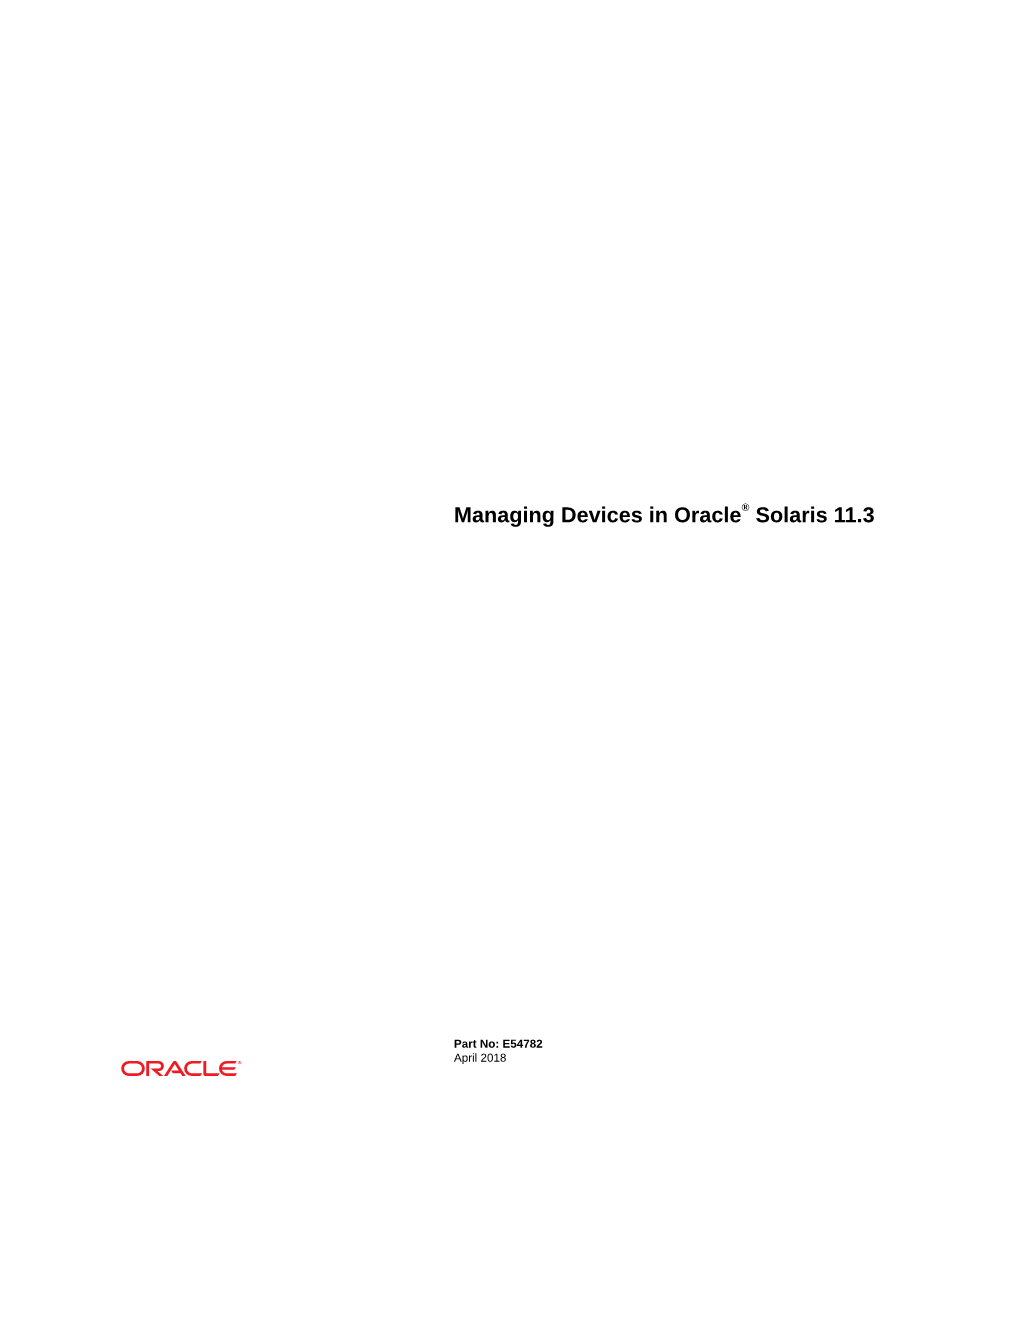 Managing Devices in Oracle® Solaris 11.3